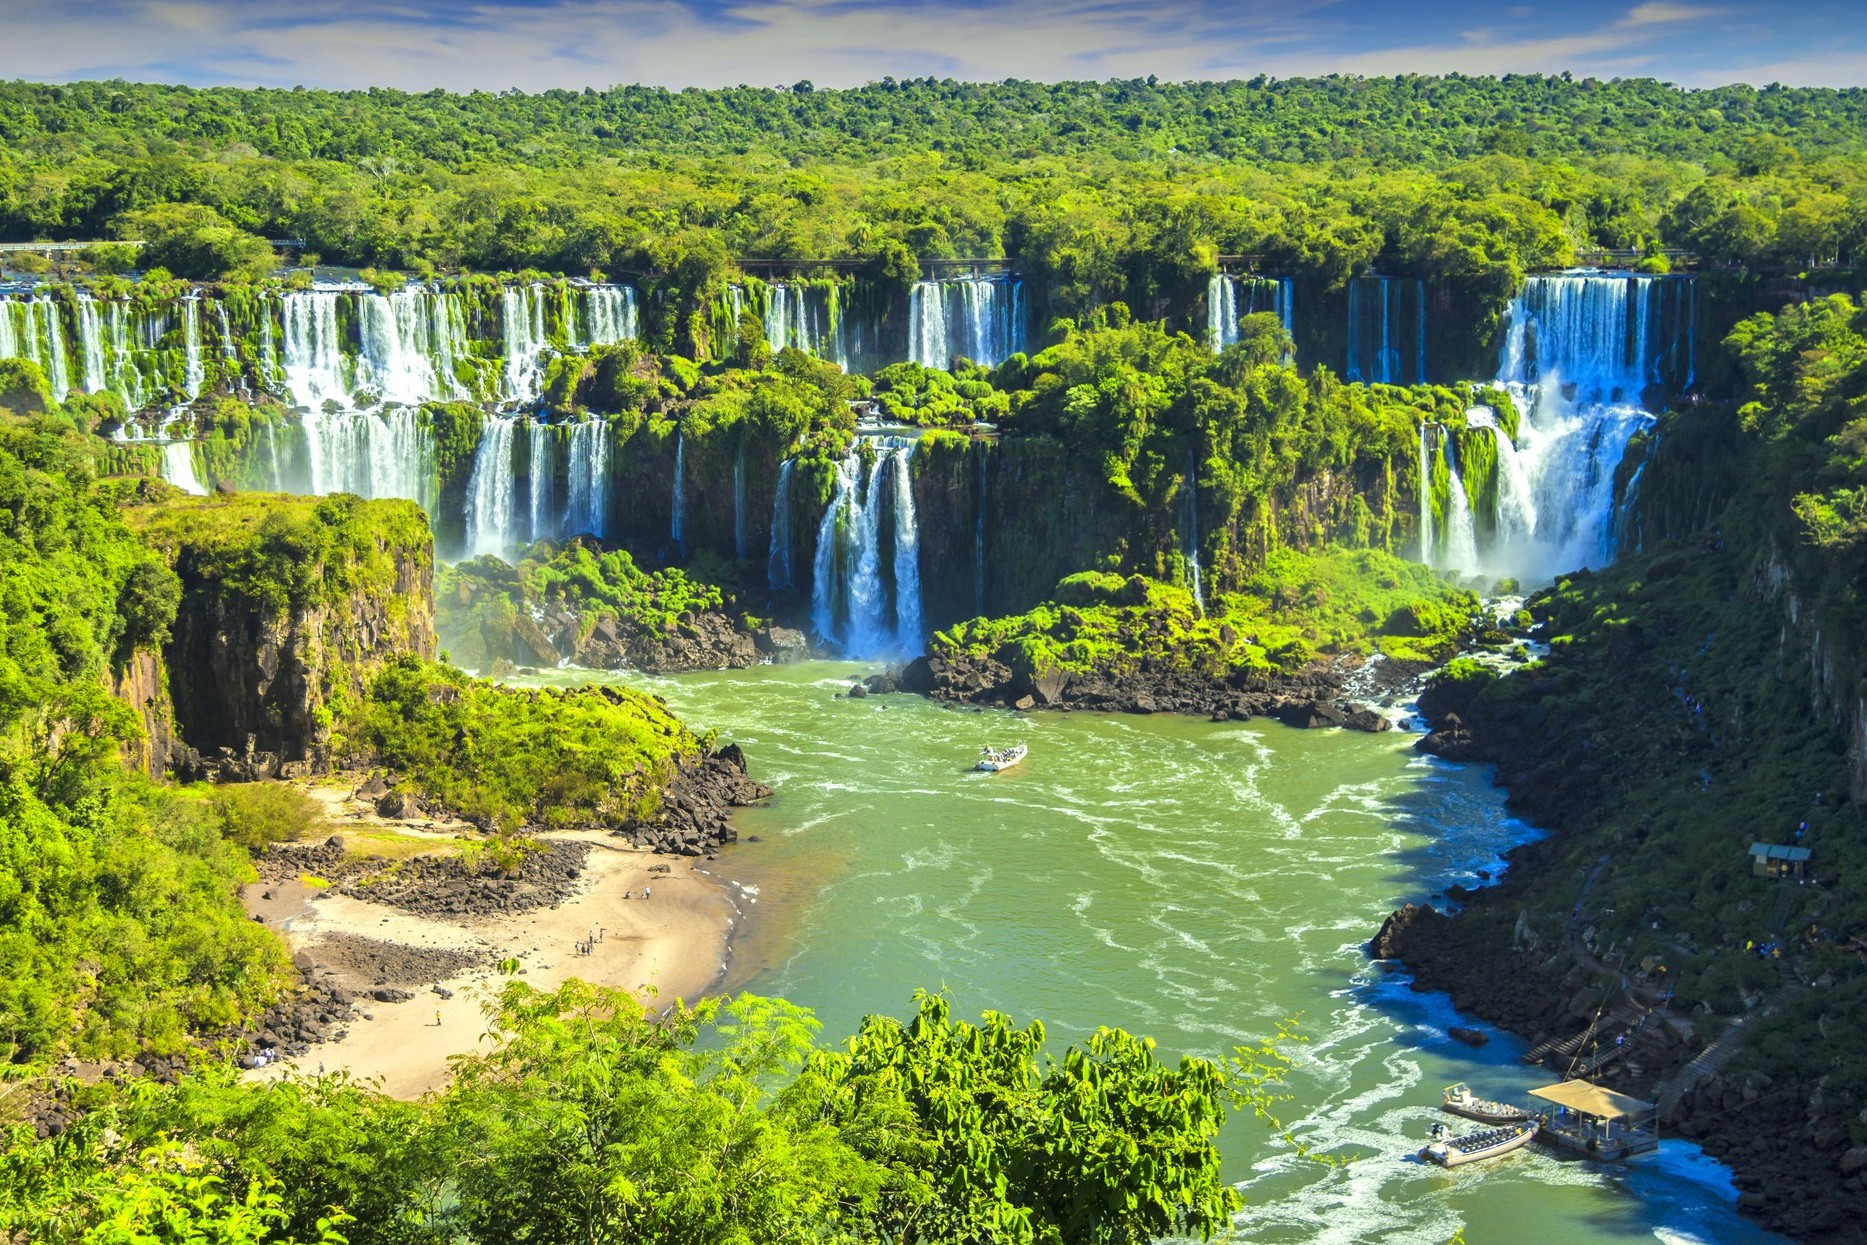 49496144-7adb-4e0b-82c0-668acb61d7d0-misiones-panorama-argentine-side-waterfall-flows-streams-falling-down-parana-river-surrounded-tropical-jungle-forest-iguazu-falls-argentina-SS_large.jpg